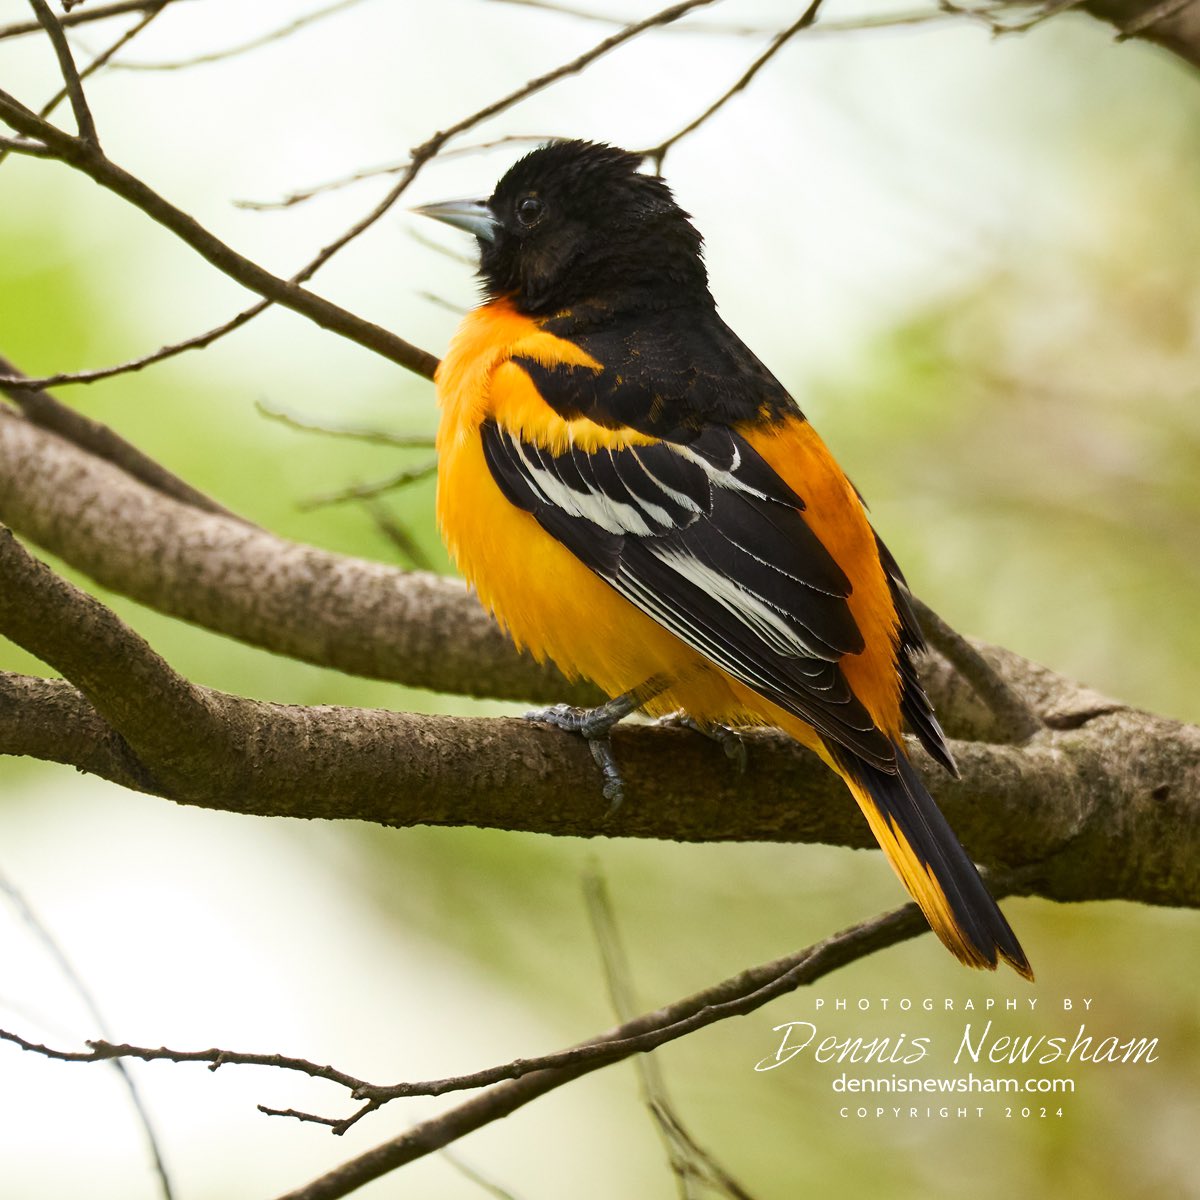 Visiting #ProspectPark last week ! It was great to see a a Baltimore Oriole!
DennisNewsham.com New Online store design ! A resource for wildlife themed gifts. #Oriole   #nyc #gifts   #birdcpp